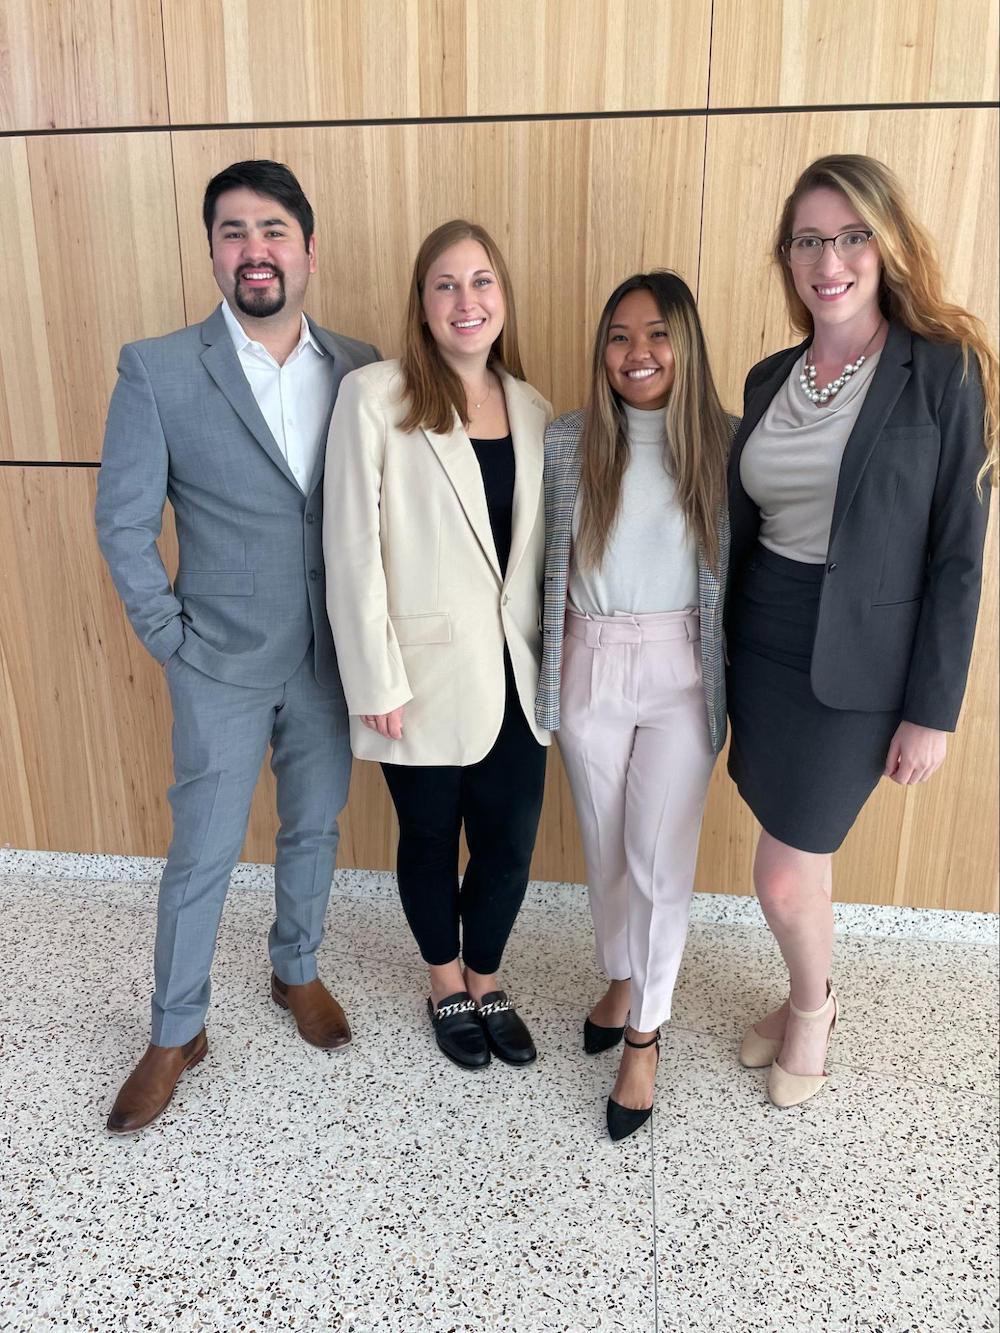 The four members of the Health Justice League, who took 2nd place in the McCombs Case Competition at UT Austin